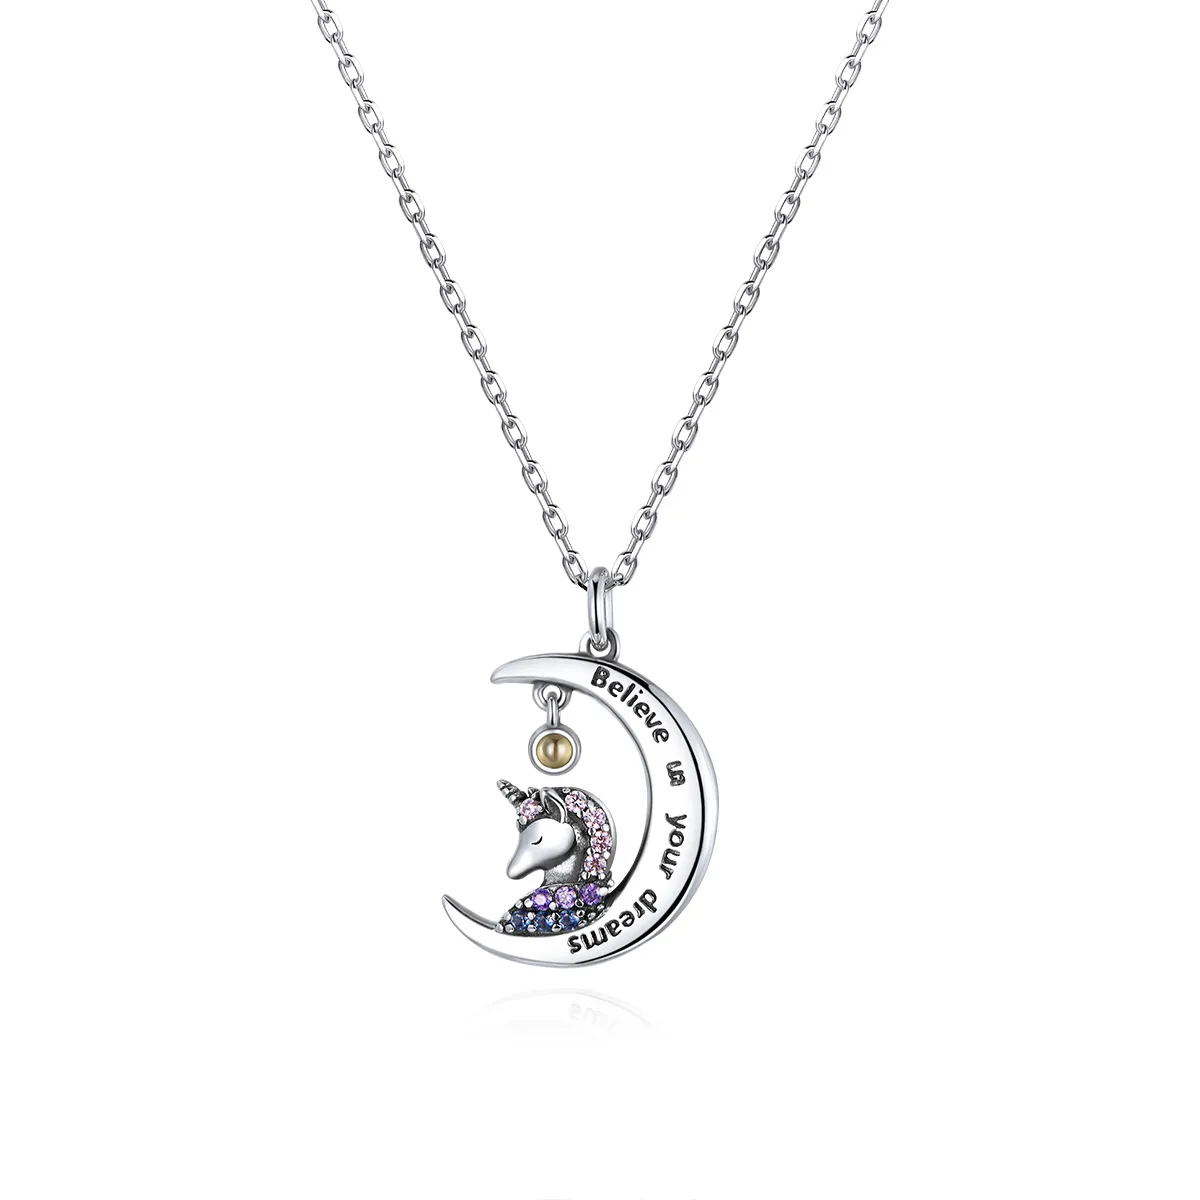 Pandora Style Silver Believe In Your Dreams Pendant Necklace - SCN410